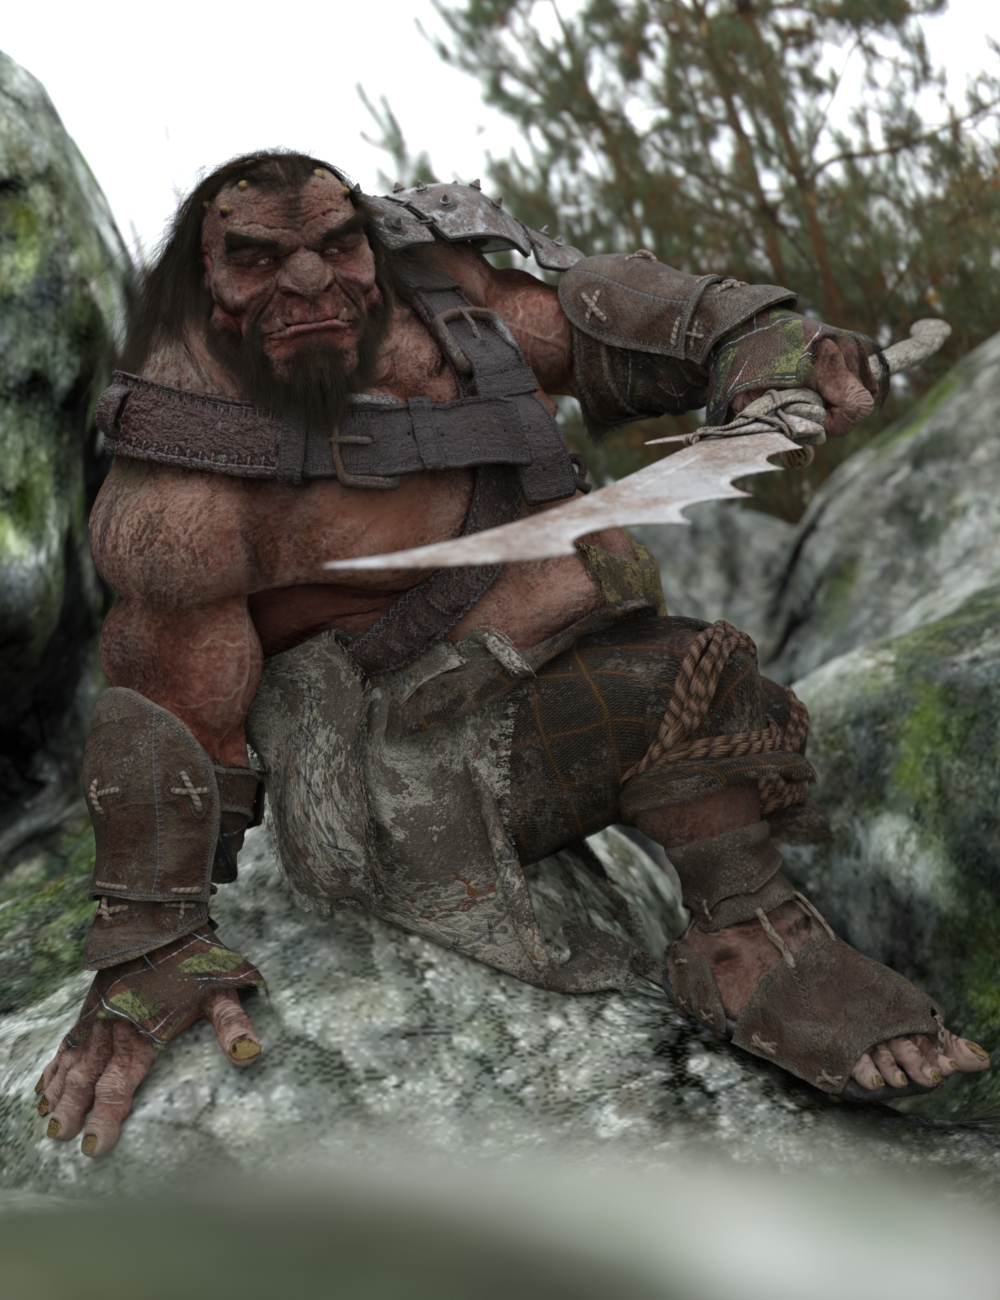 The Giant Bergelmir HD for Genesis 8 Male